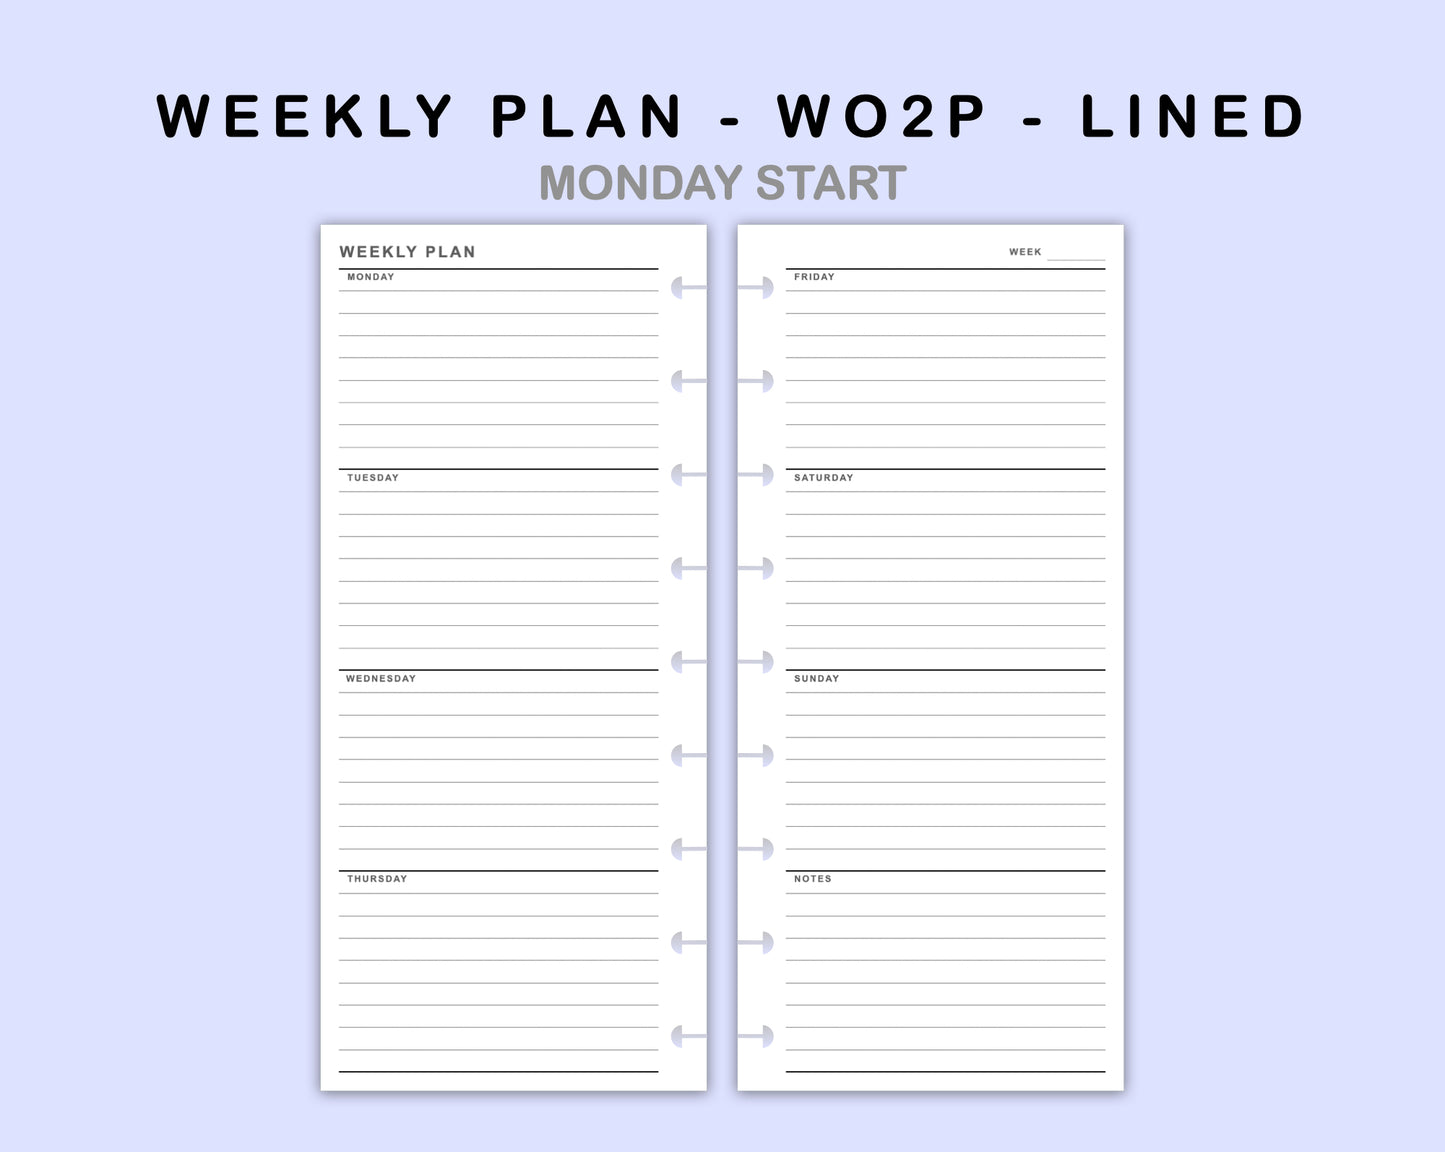 Skinny Classic HP Inserts - Weekly Plan - WO2P - Lined